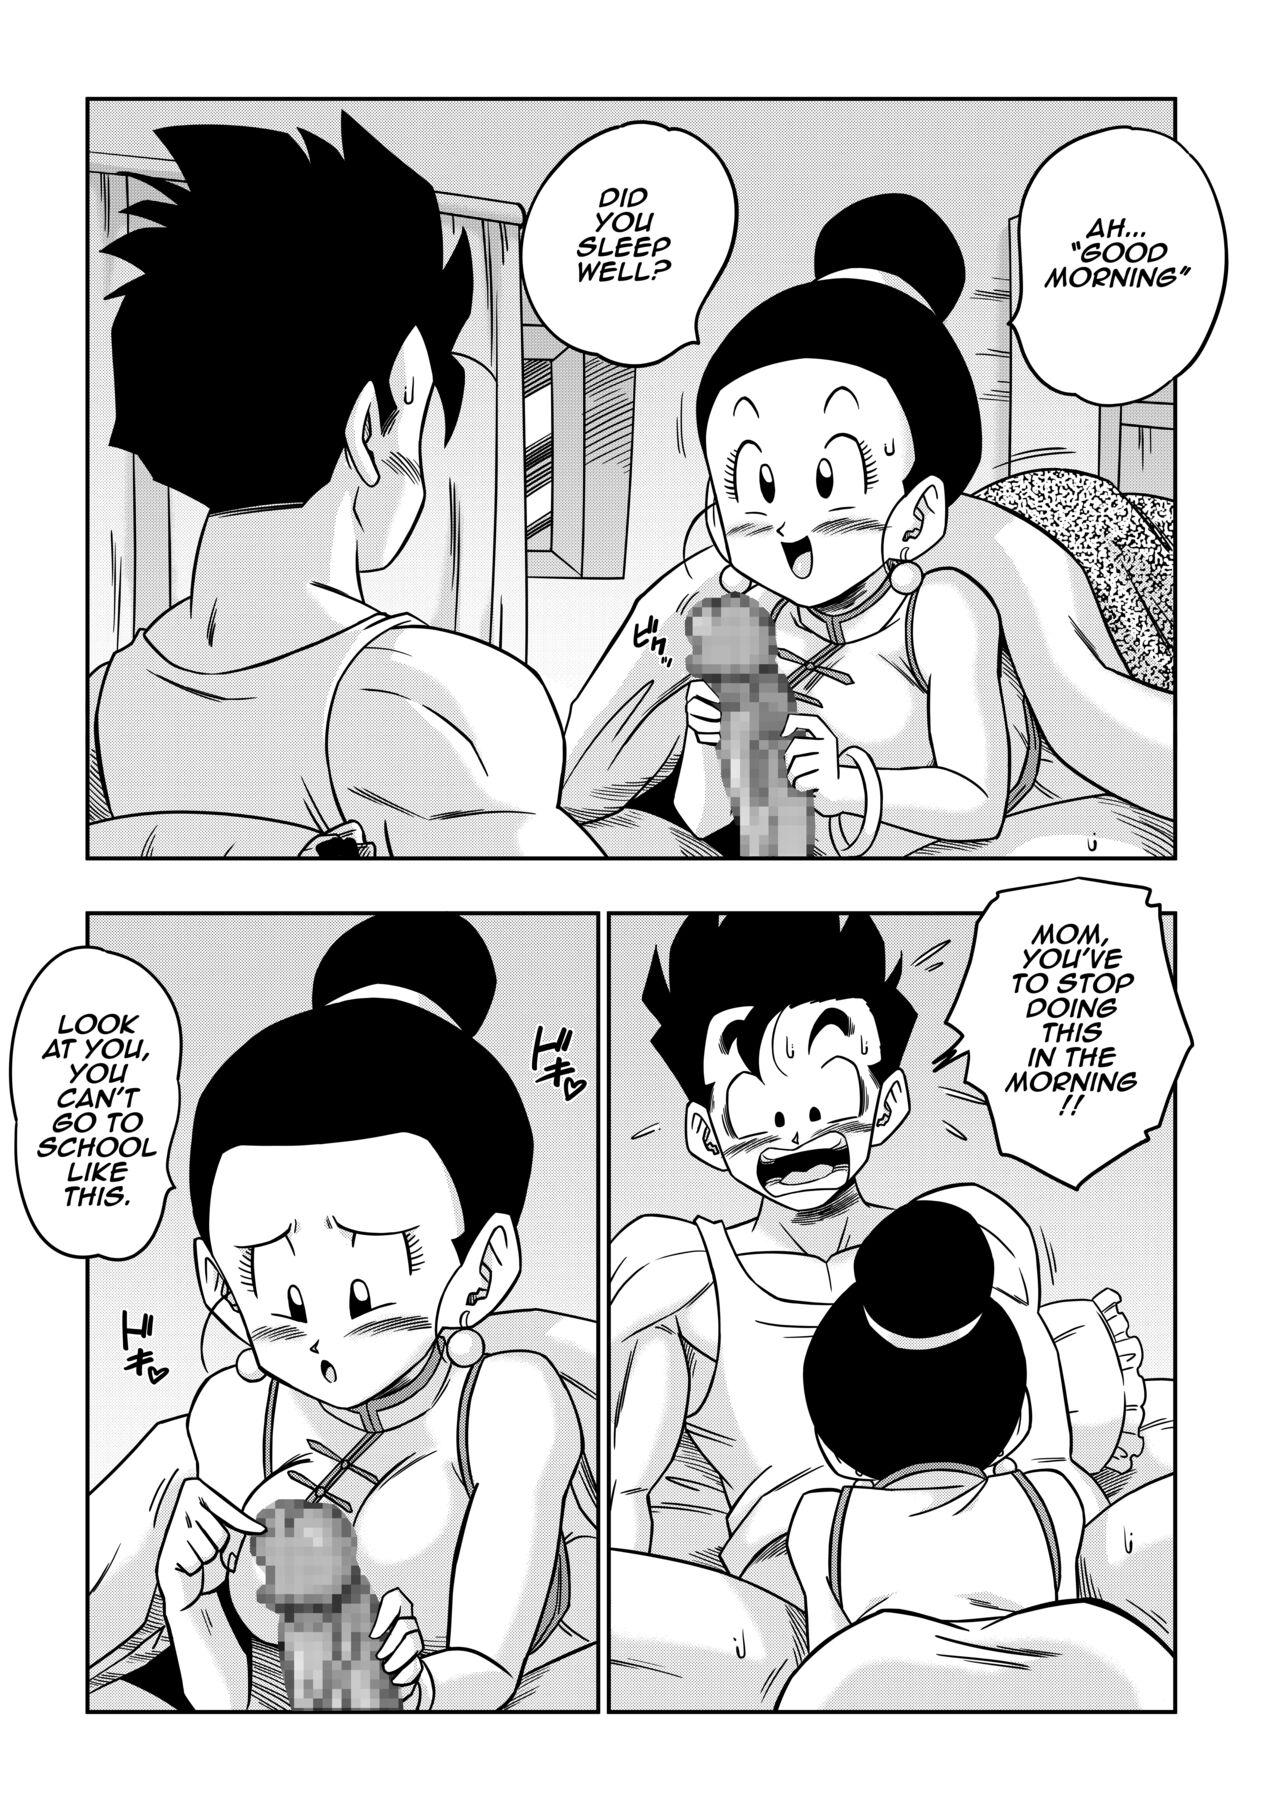 Girl LOVE TRIANGLE Z PART 5 - Dragon ball z Oiled - Page 4